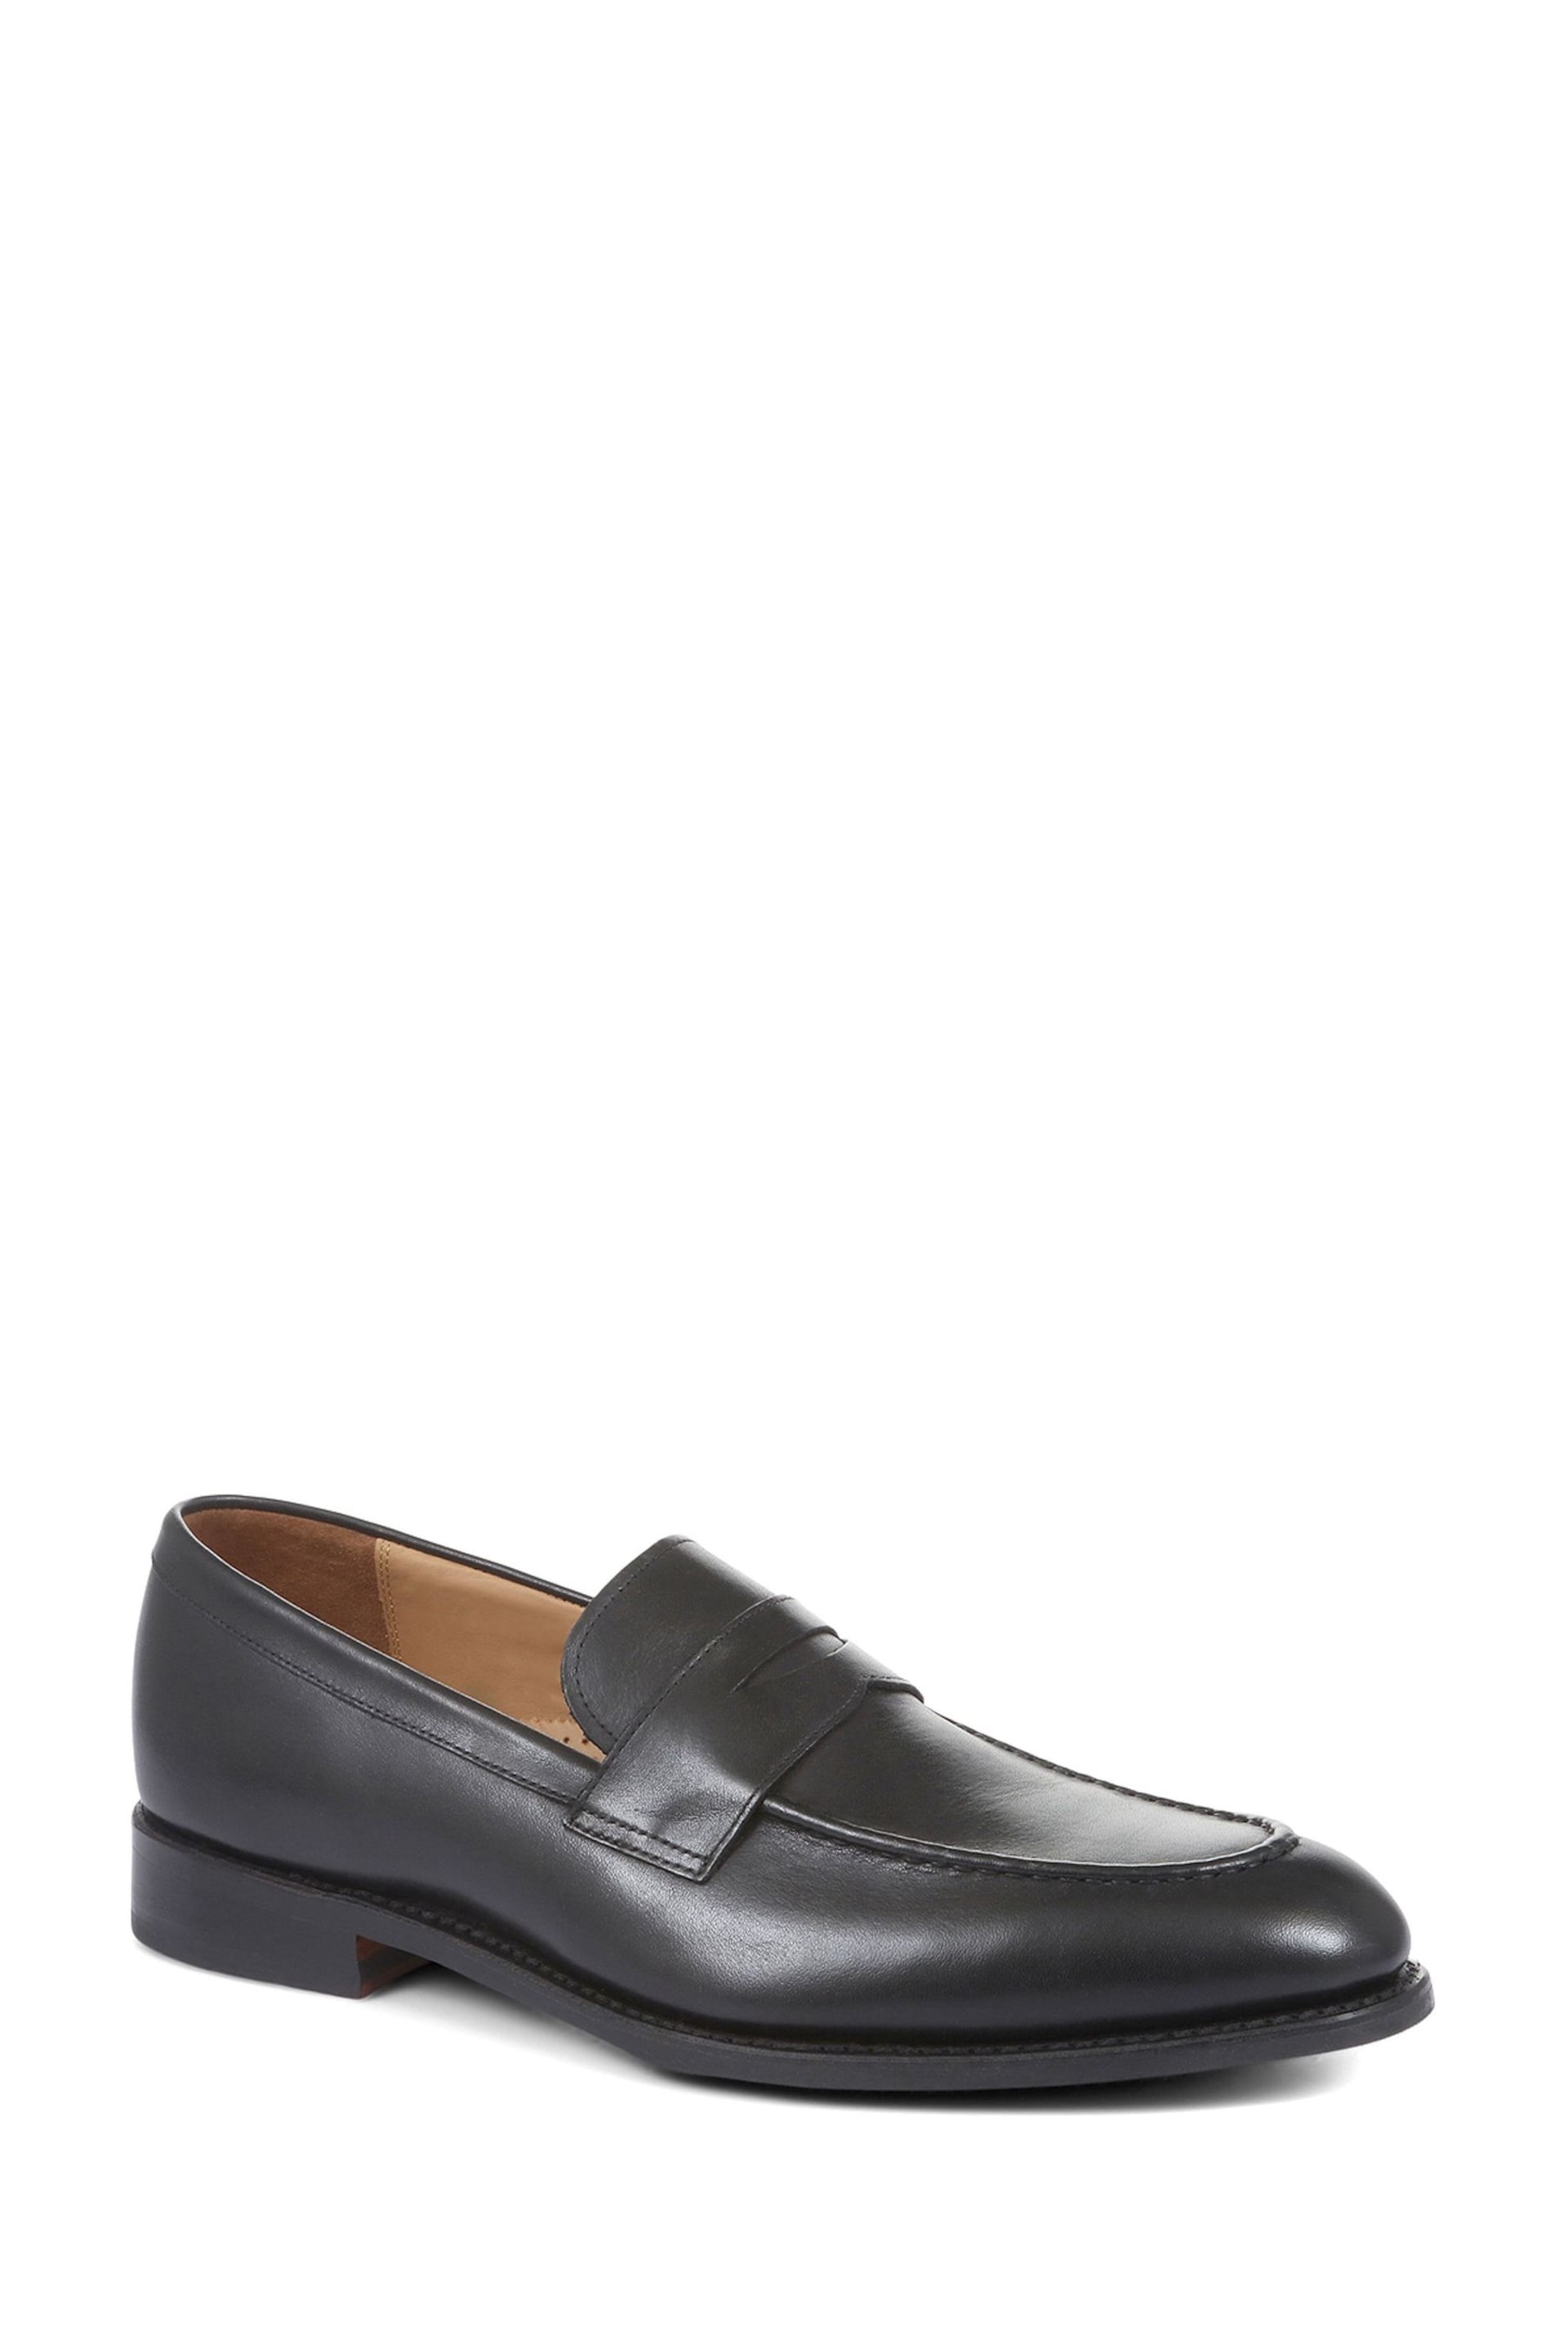 Jones Bootmaker Goodyear Welted Men's Leather Penny Loafers - Image 3 of 6